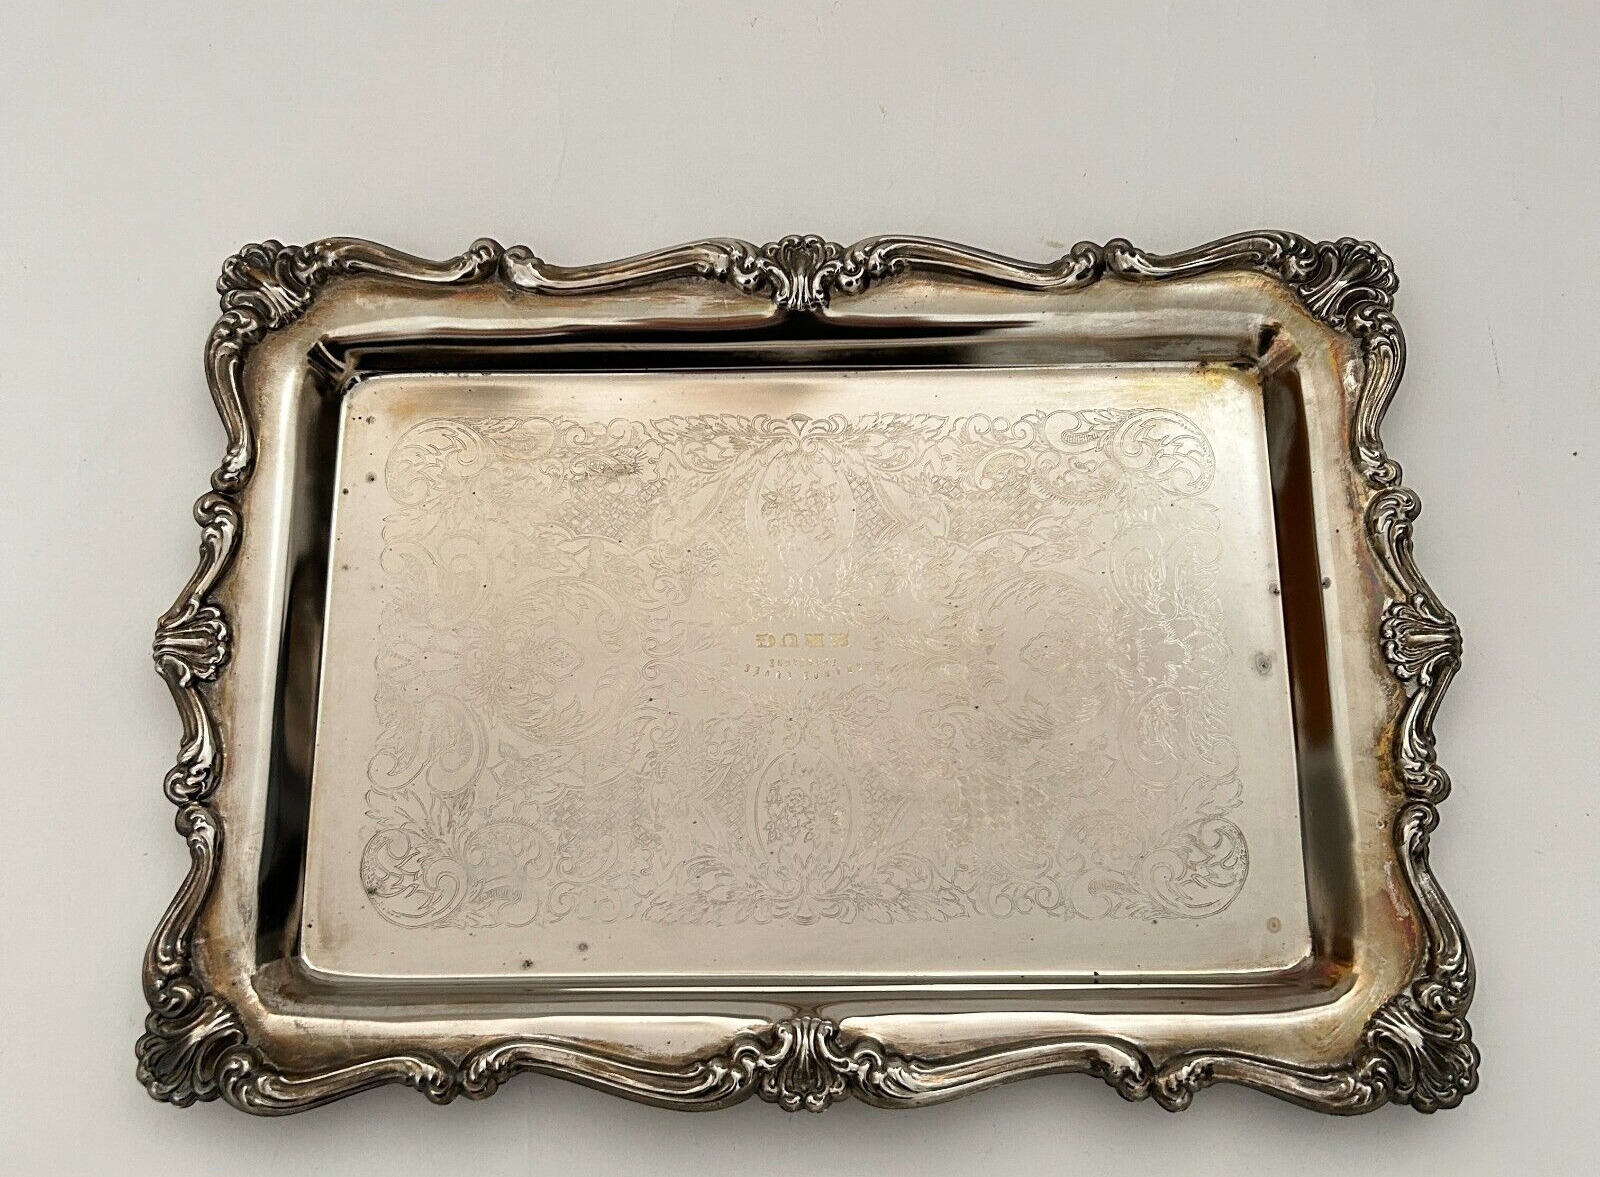 VTG KRUG Champagne Grand Cuvee Silver Plated Ep On Steel Service Tray Hong Kong